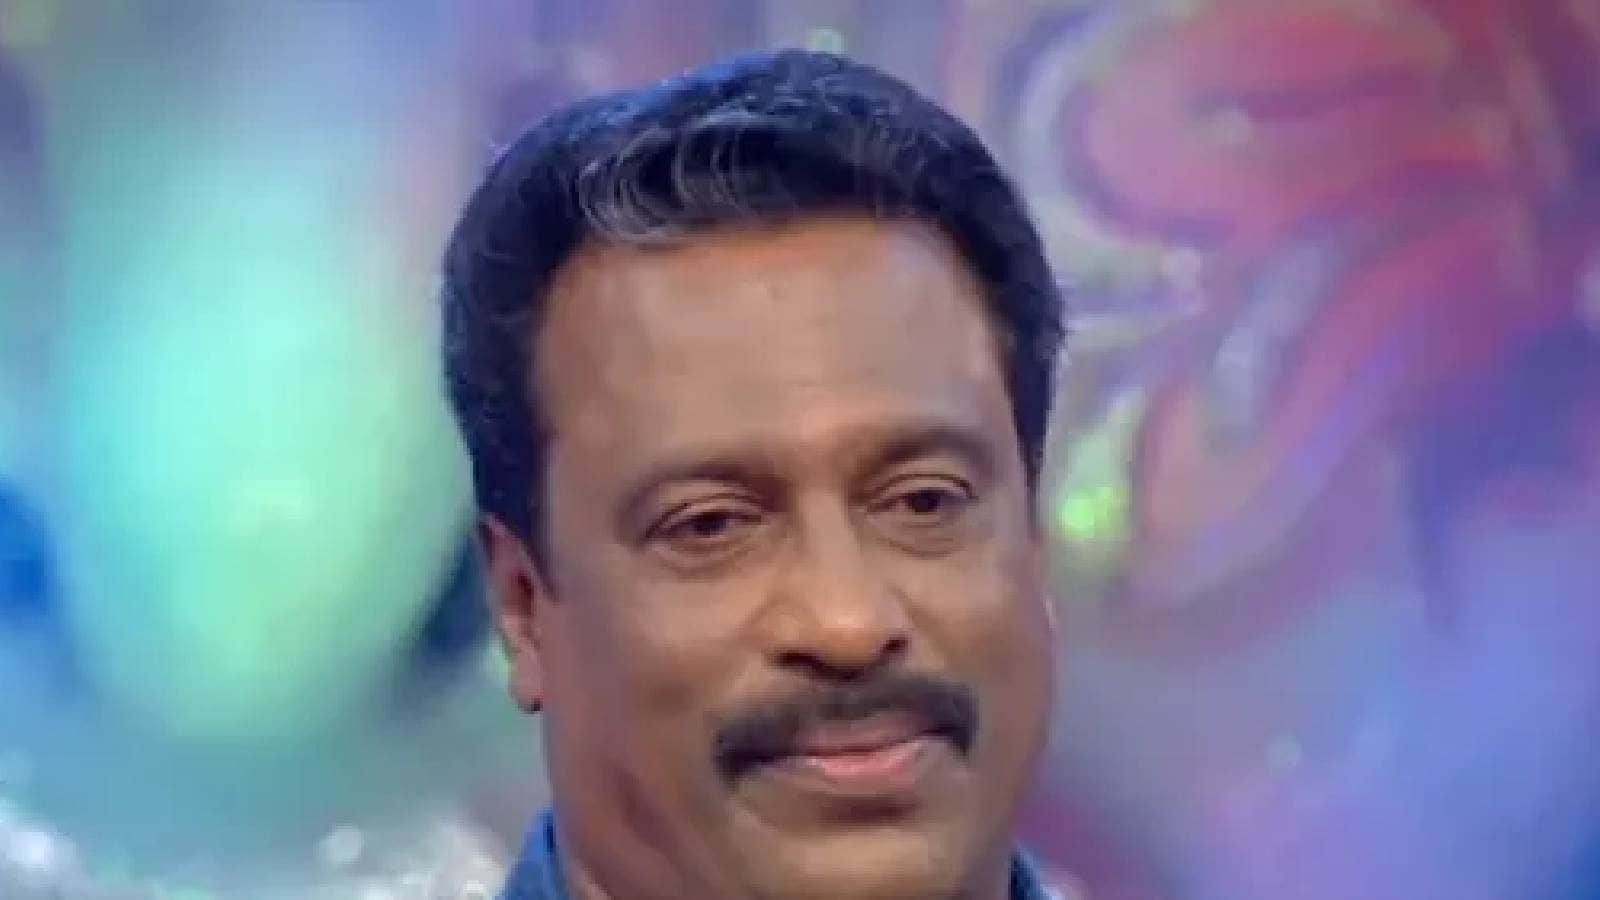 Abu Salim Abu Salim Has Been In Malayalam Cinema For 45 Years Locals Pay Respect To The Actor